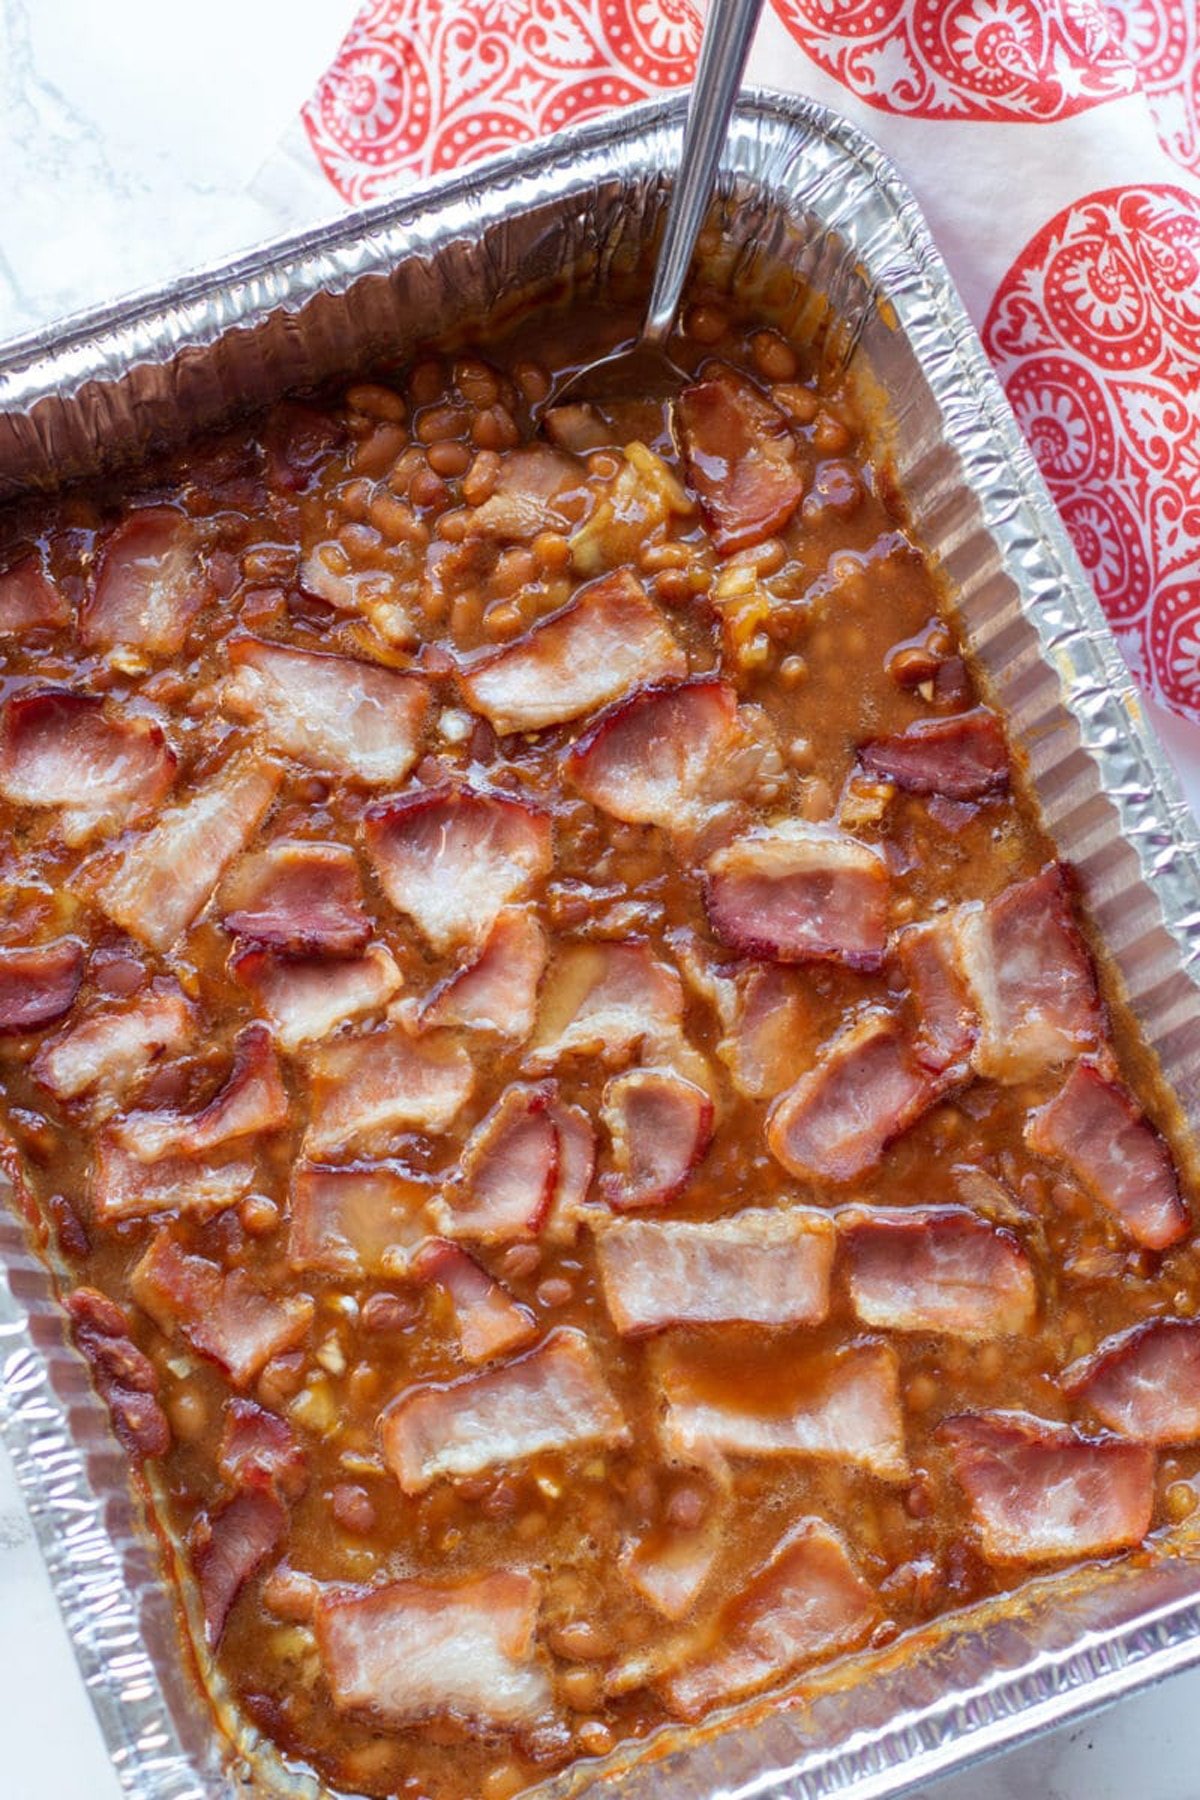 Pan containing baked beans cooked in a smoker topped with bacon. 